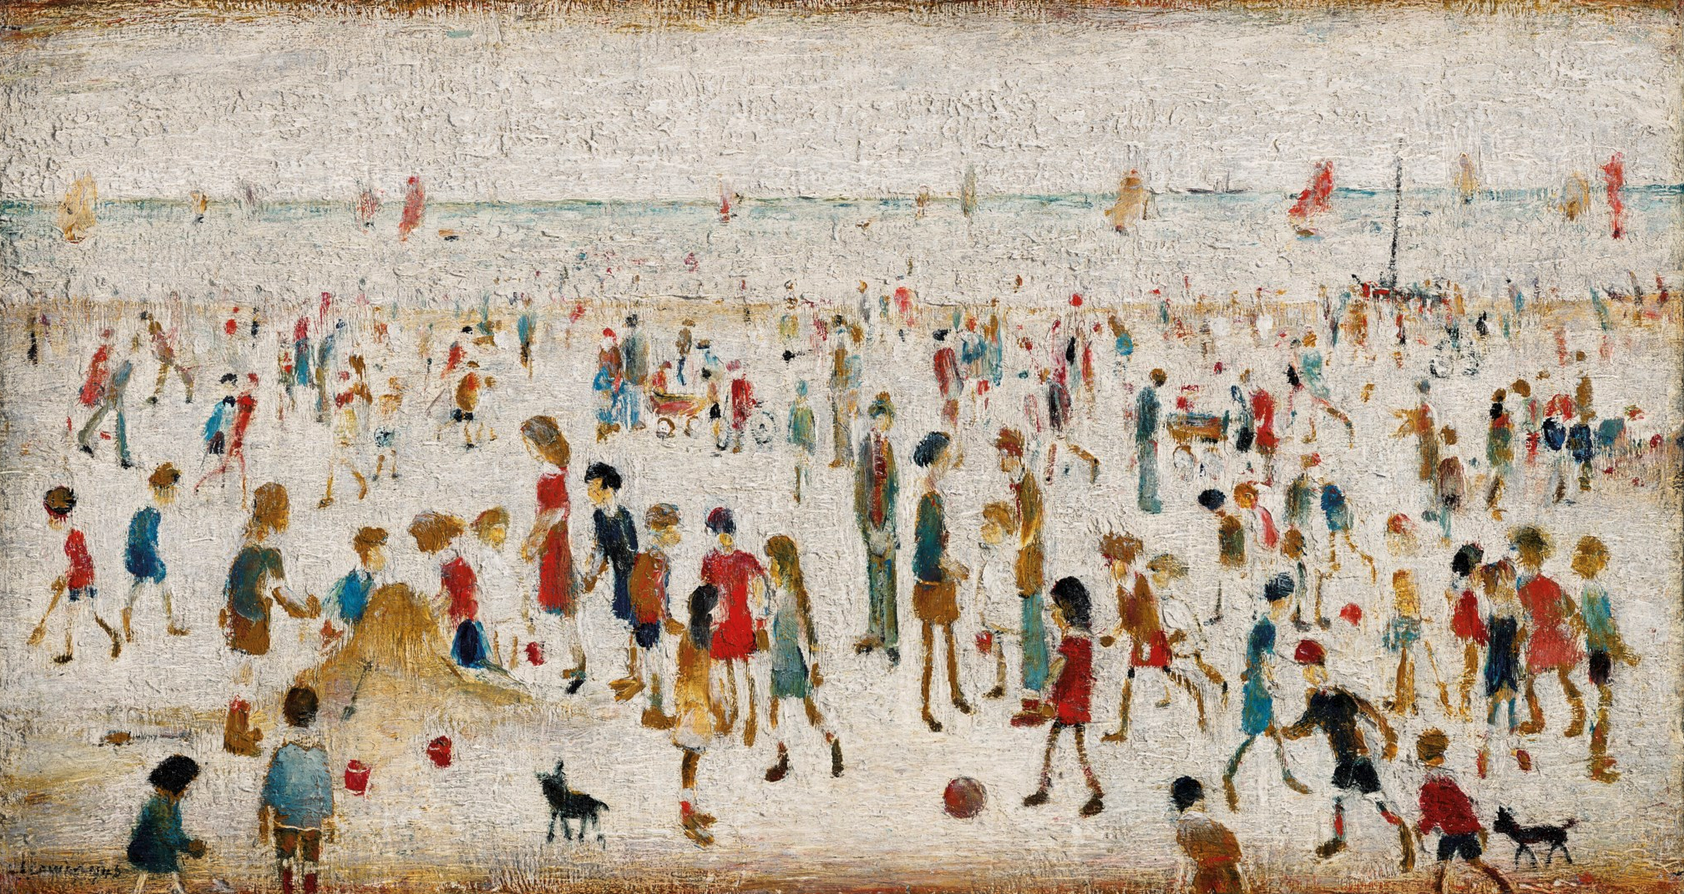 On the Sands (1946) by Laurence Stephen Lowry (1887 - 1976), English artist.